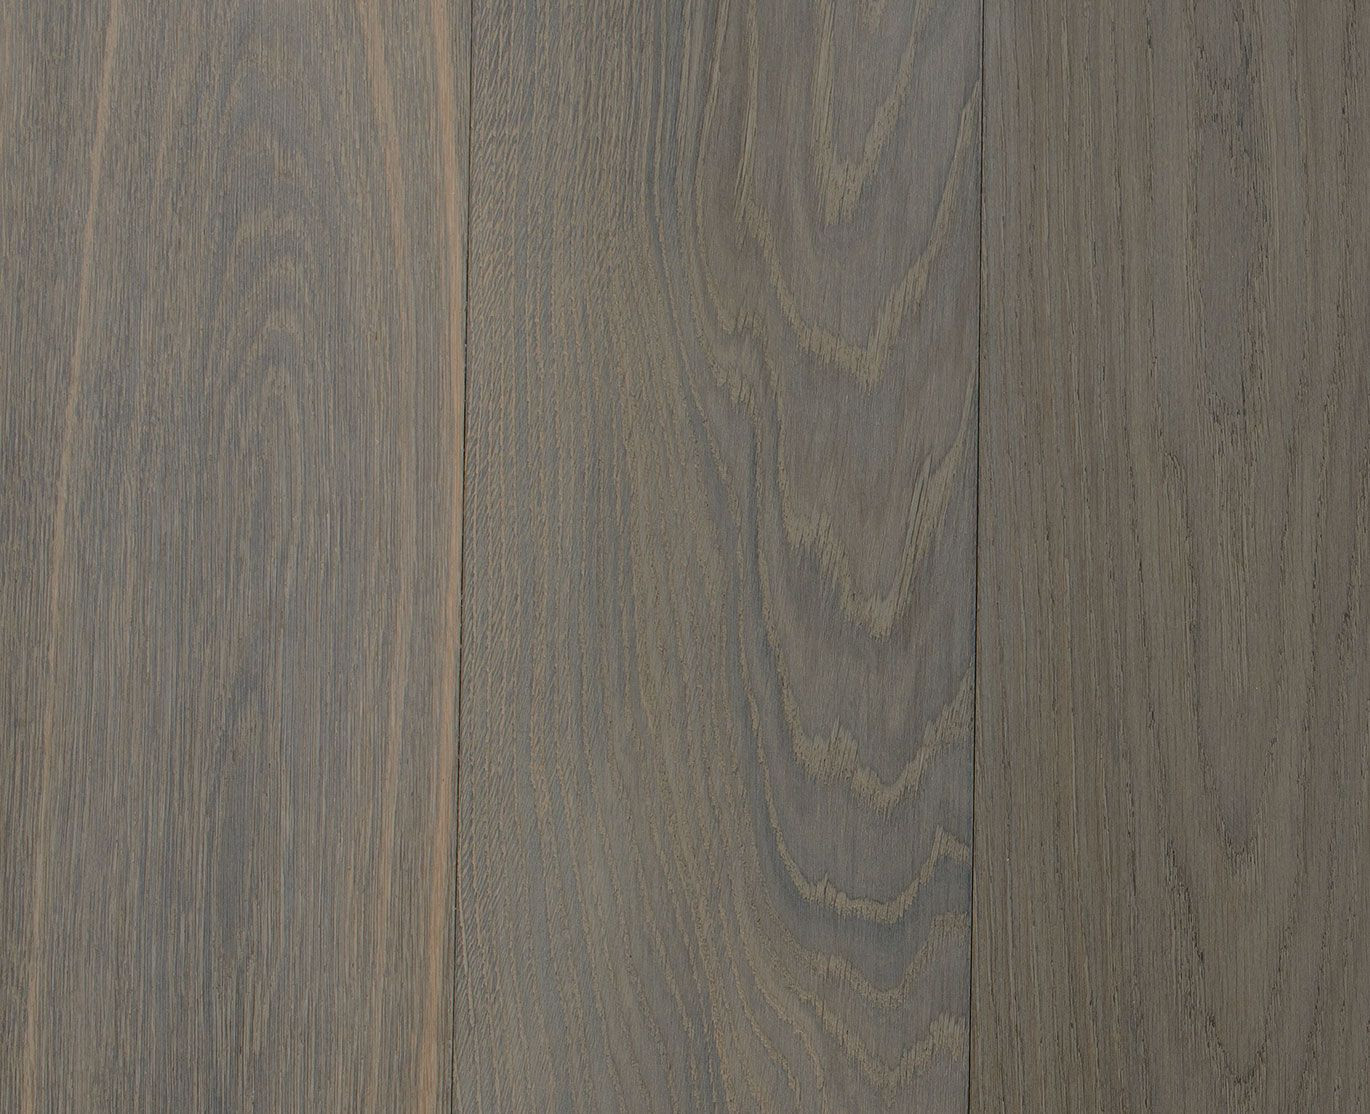 15 Lovable Hardwood Flooring Grey tones 2024 free download hardwood flooring grey tones of dark and moody carrying all shades of grey with hints flooring with dark and moody carrying all shades of grey with hints